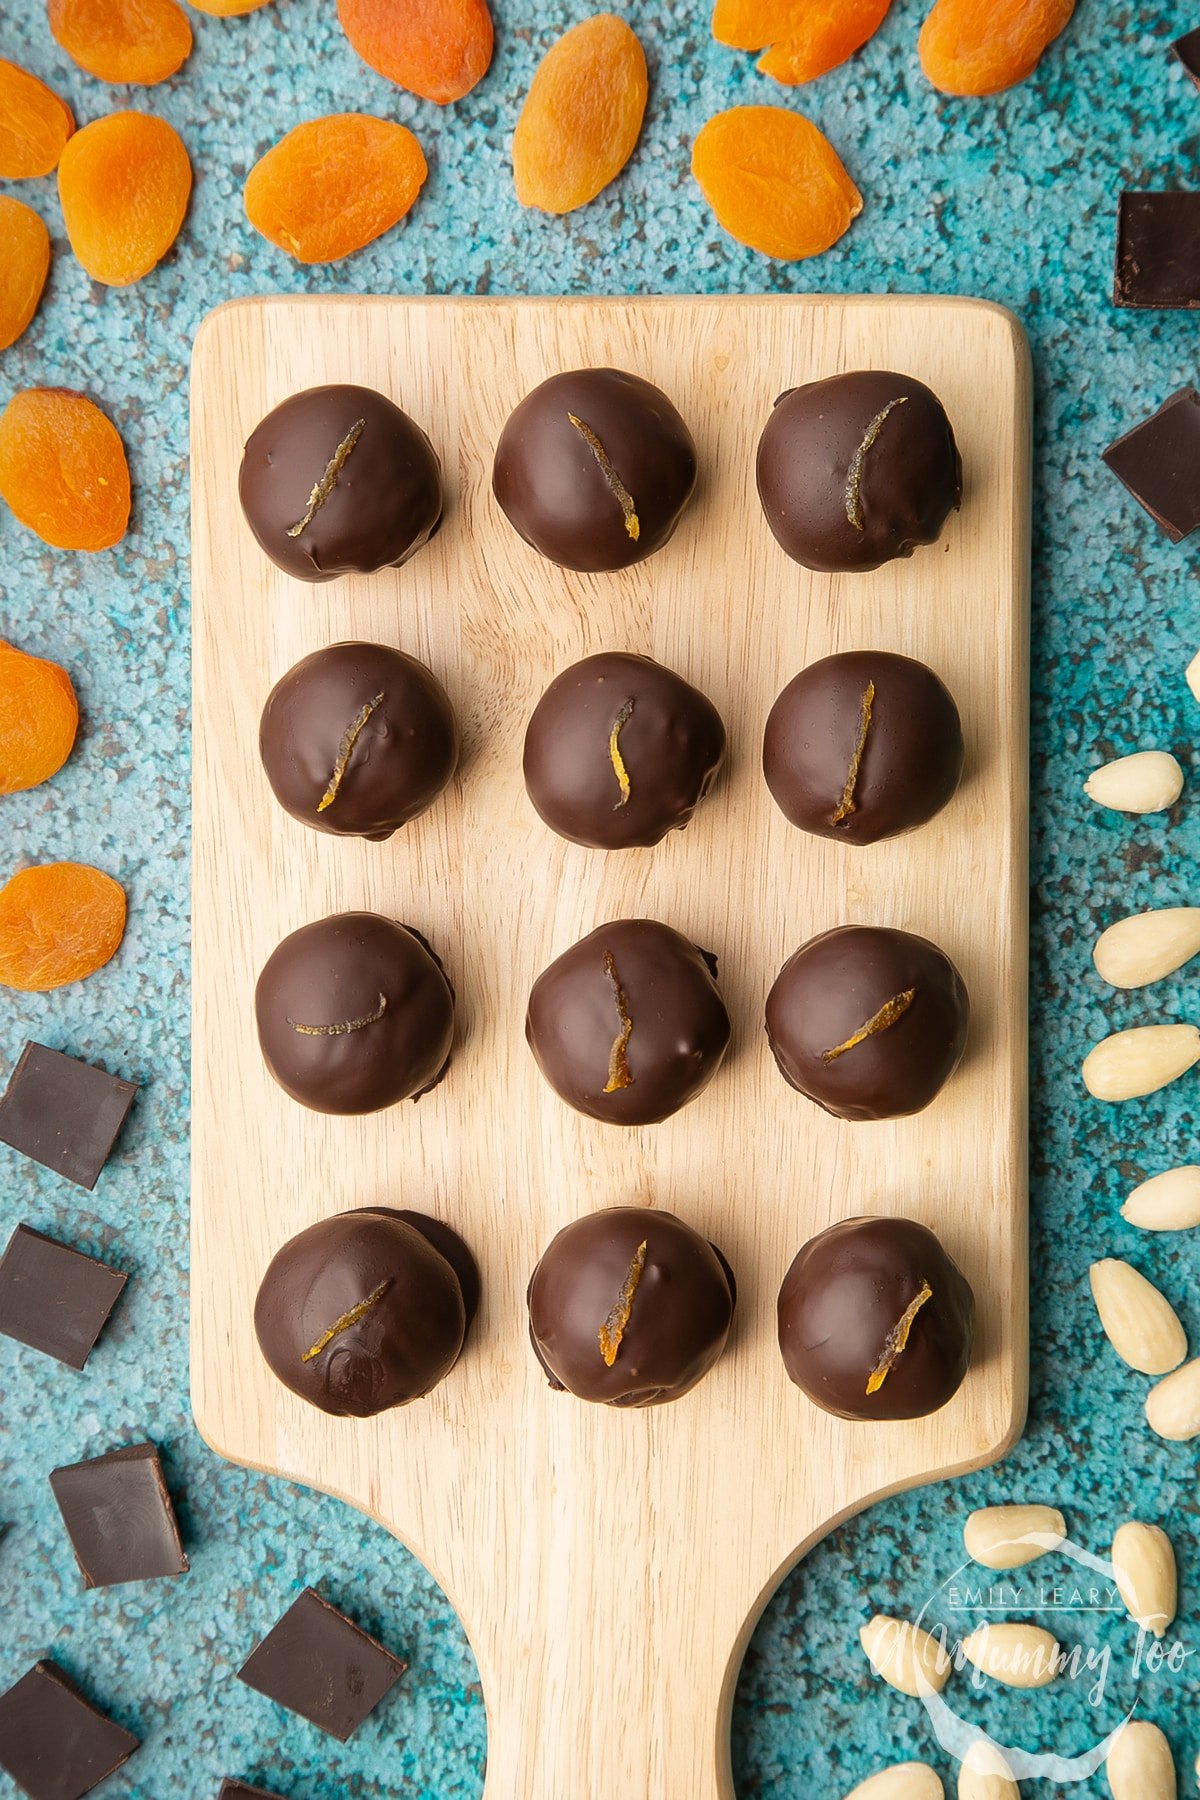 12 chocolate apricot balls arranged on a wooden board. Dried apricots, blanched almonds and squares of dark chocolate surround the board.